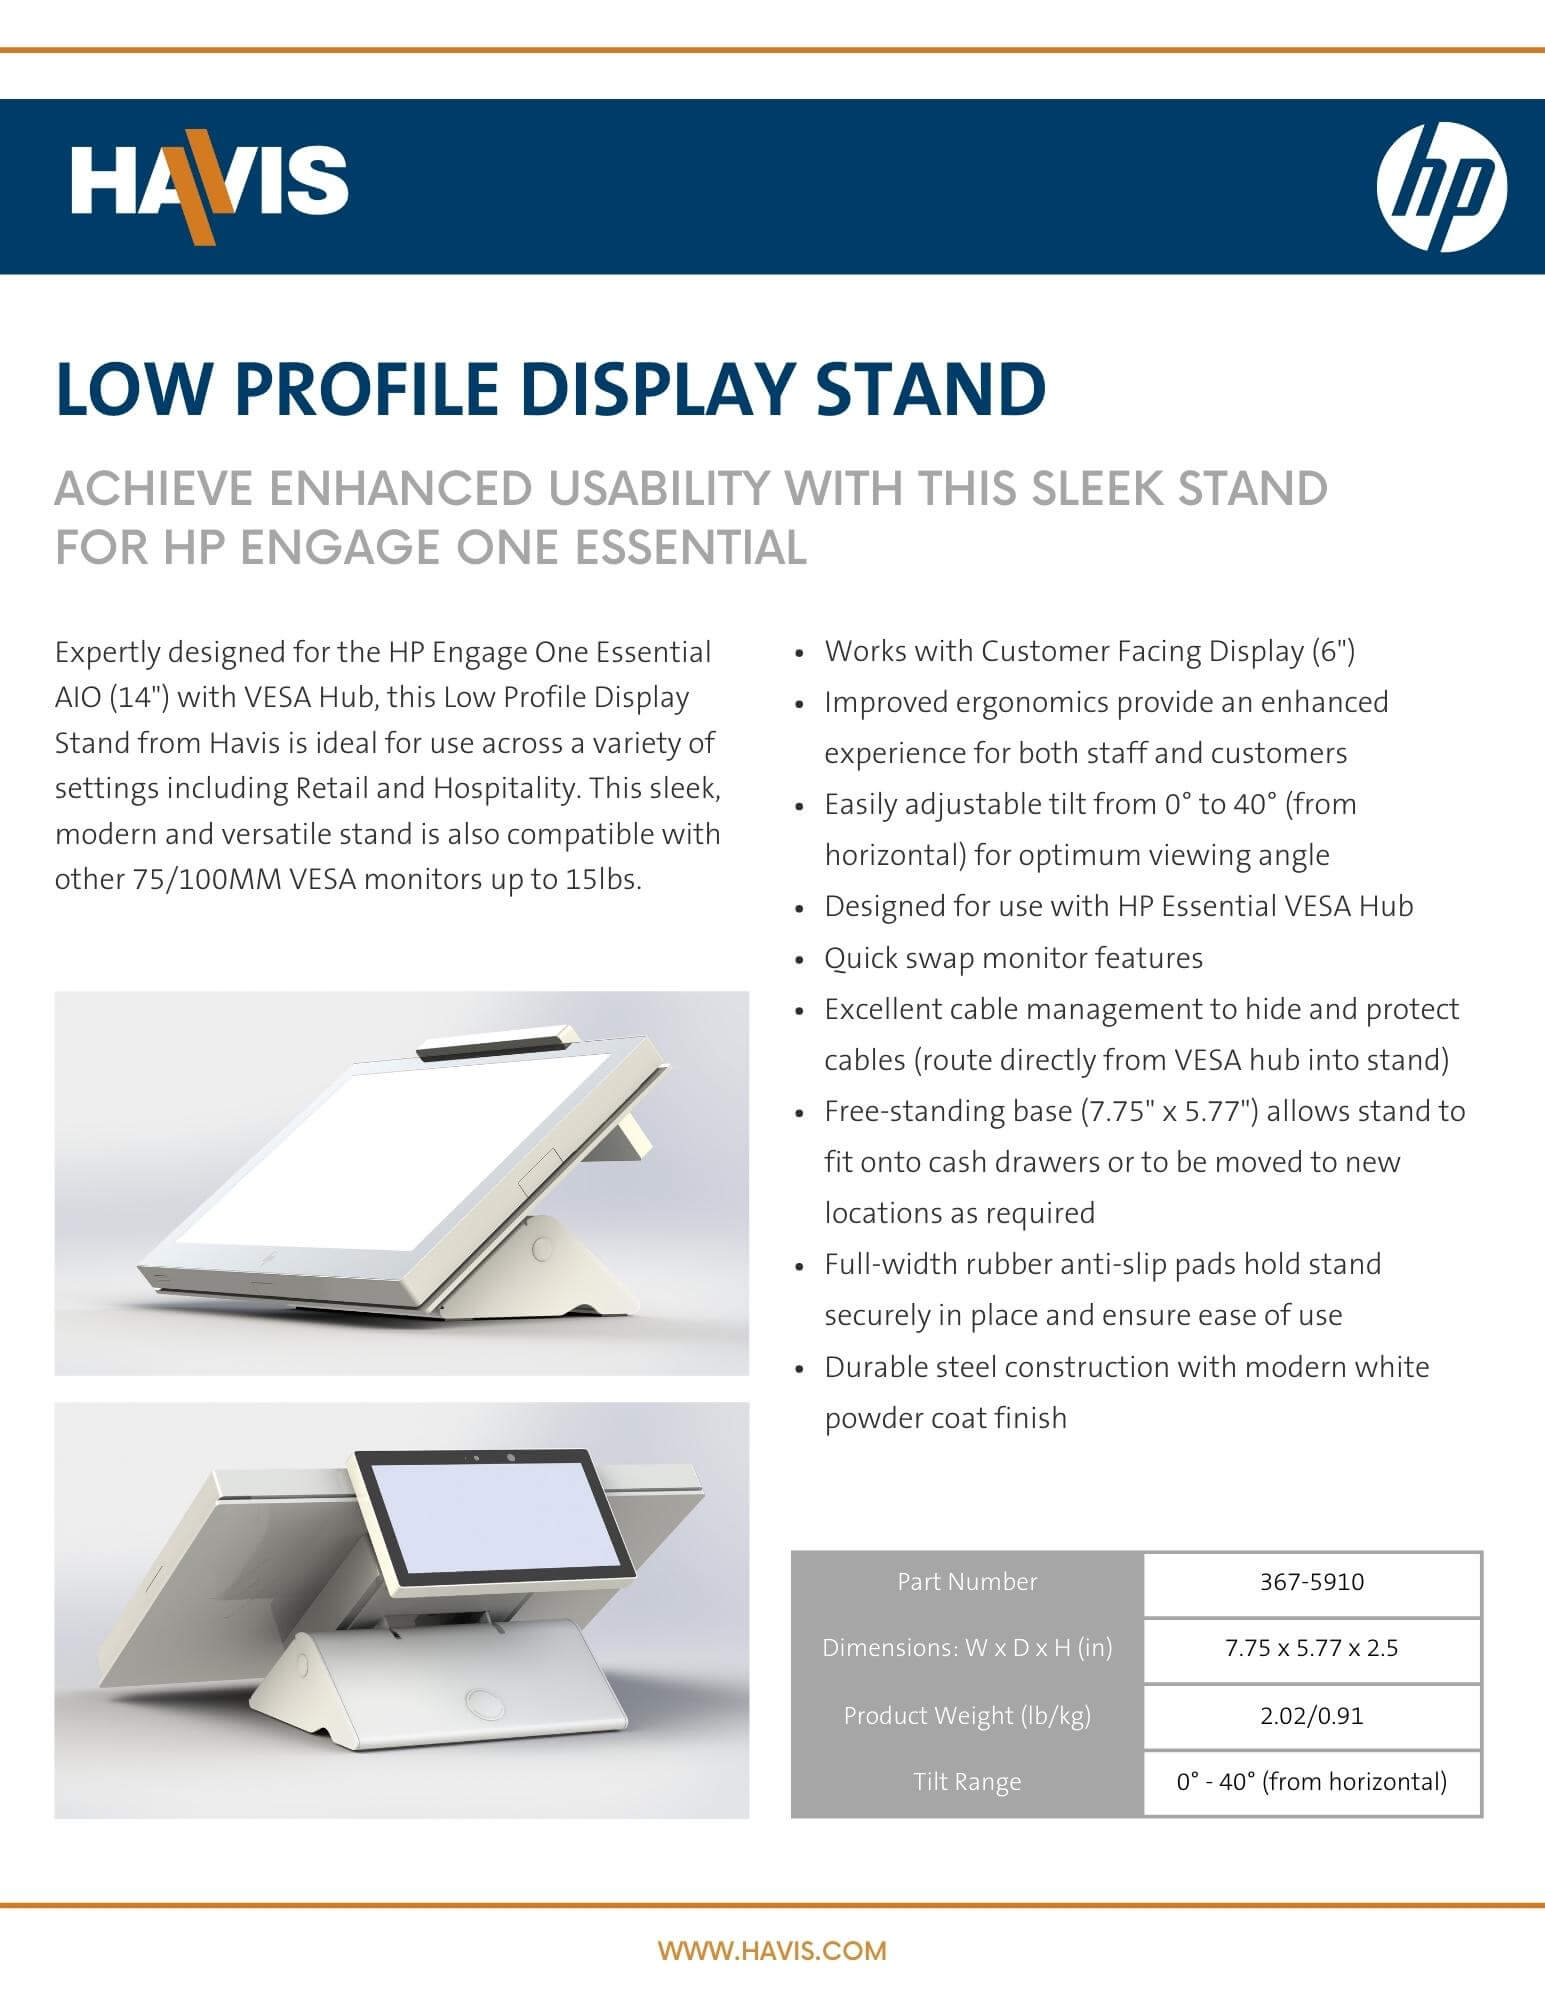 Low Profile Display Stand for HP Engage One Essential - Datasheet